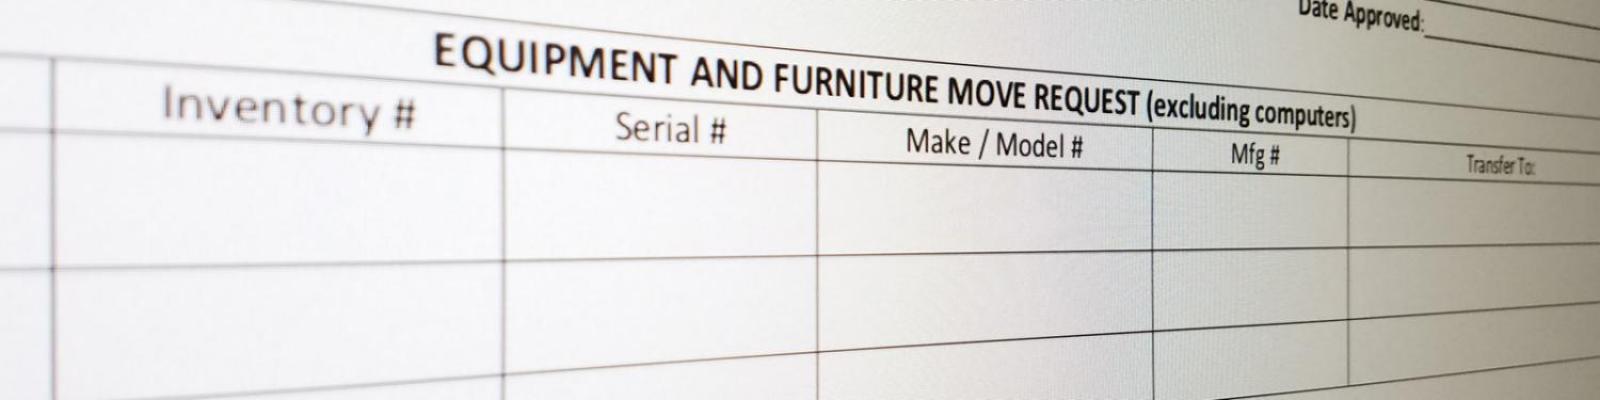 equipment and furniture move request form